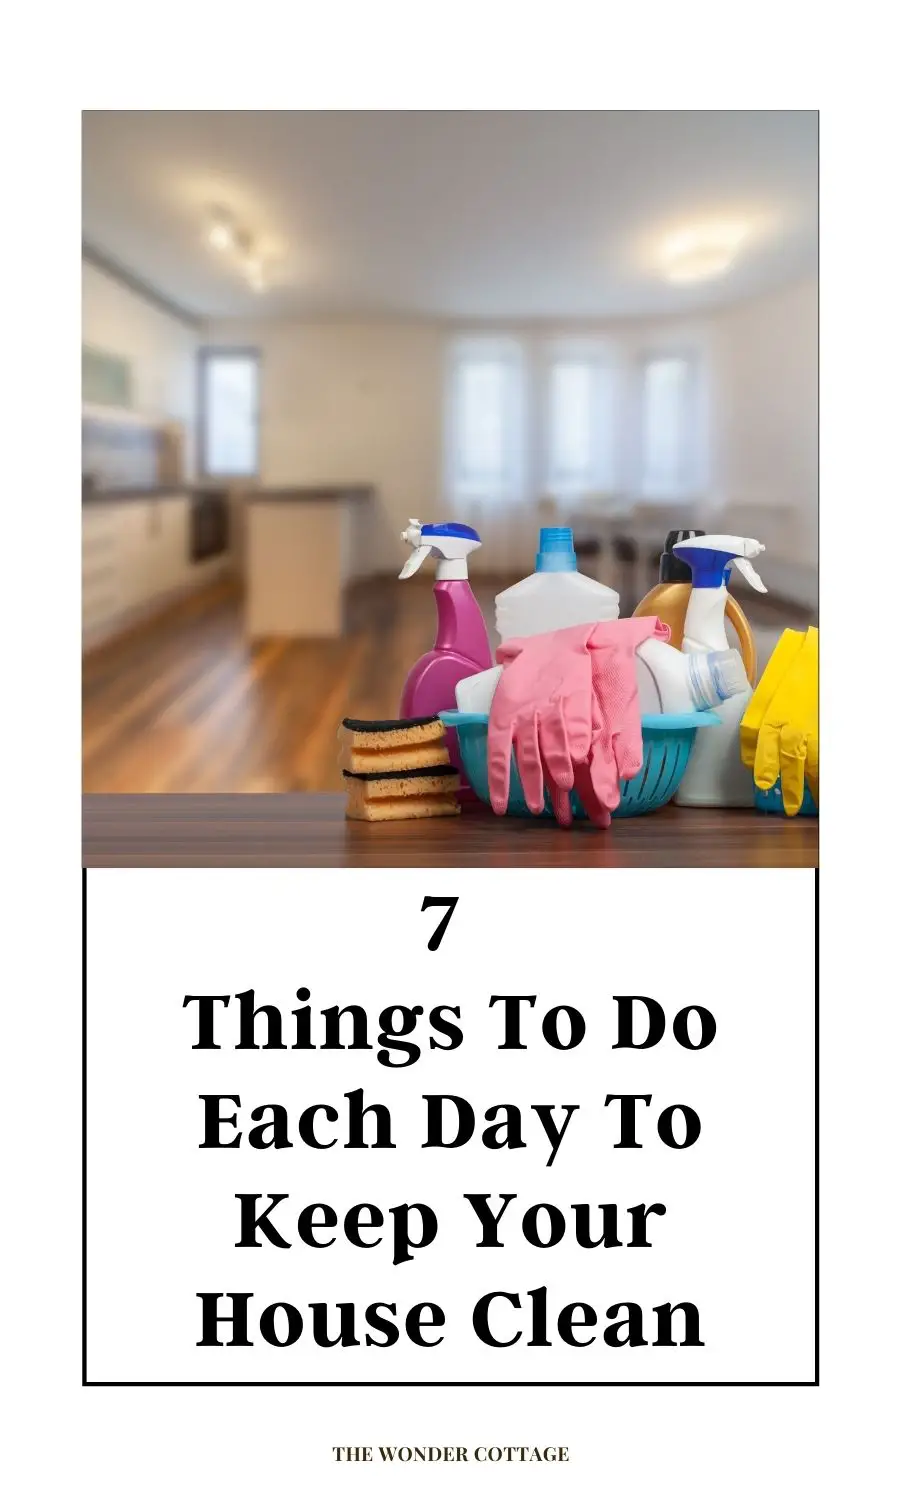 7 Things To Do Each Day To Keep Your House Clean